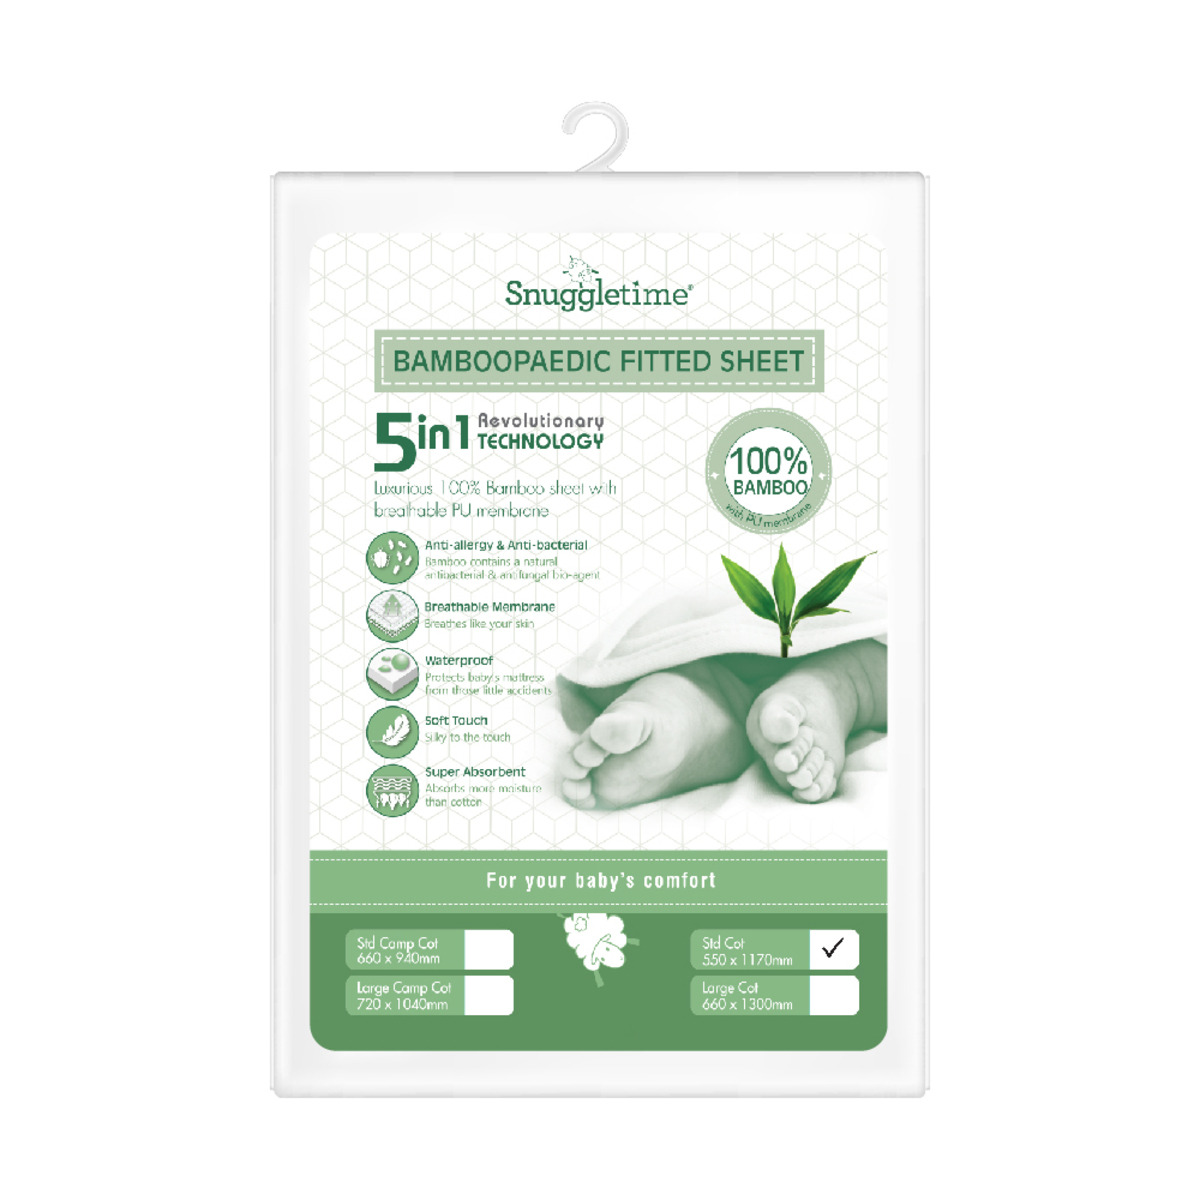 Snuggletime Bamboopaedic Healthtex Fitted Sheet